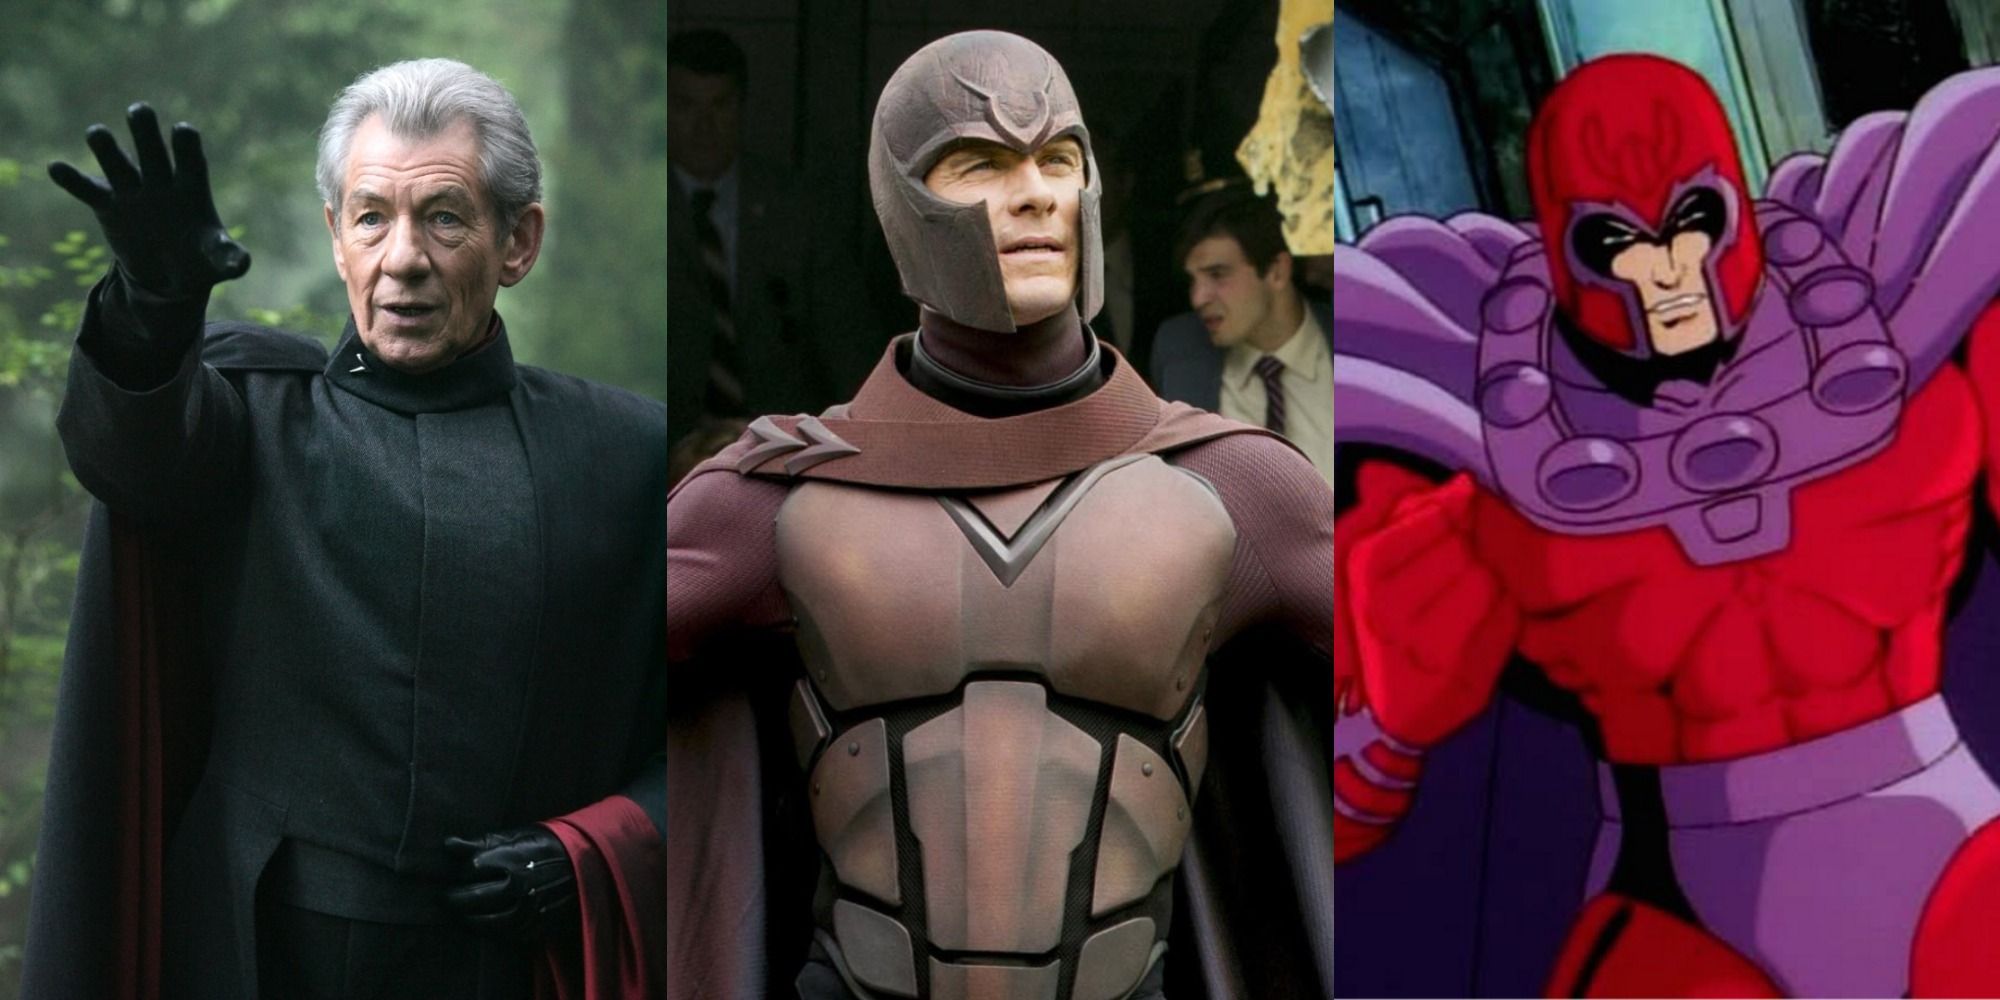 Split image of Ian McKellen, Michael Fassbender, and the animated version of Magneto